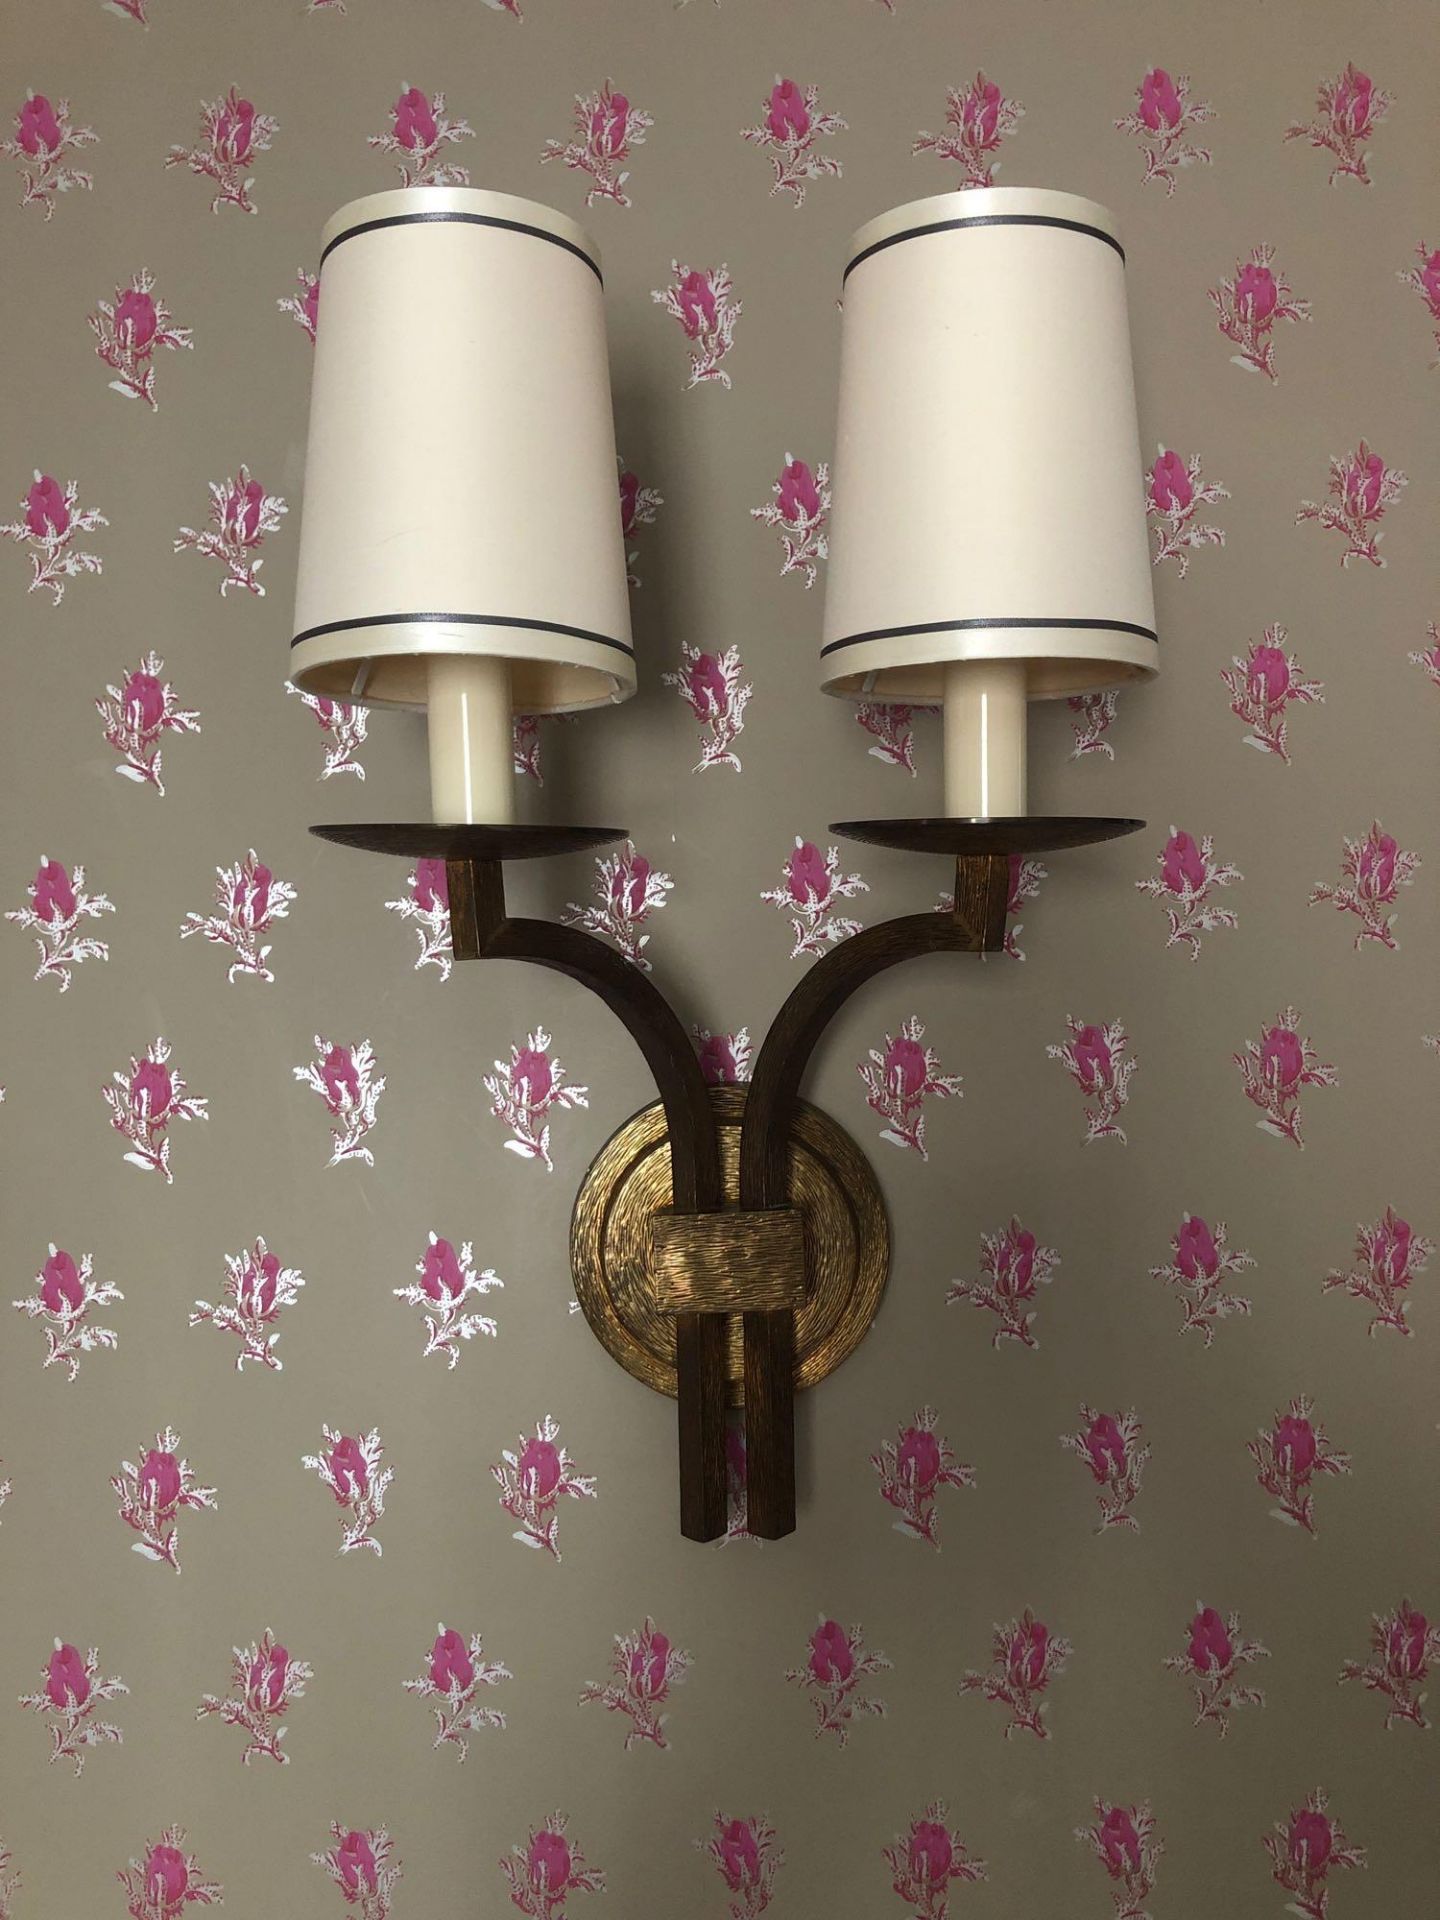 A Pair Of Dernier And Hamlyn Twin Arm Antique Bronzed Wall Sconces With Shade 51cm (Room 519)